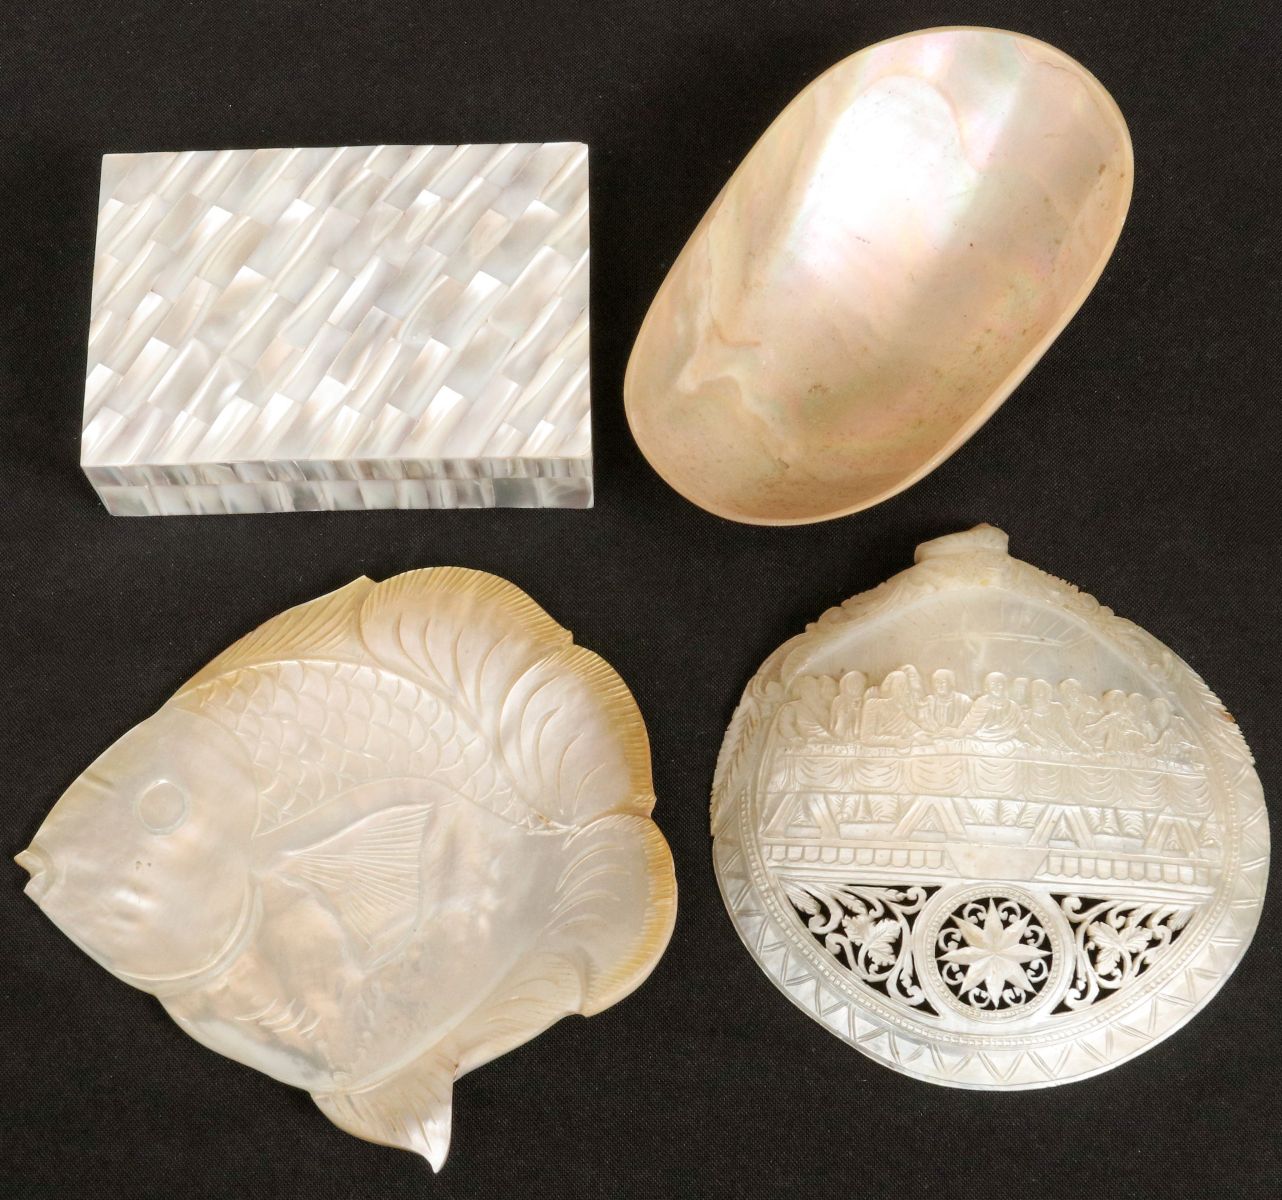 OBJECTS MADE FROM OR WITH MOTHER OF PEARL